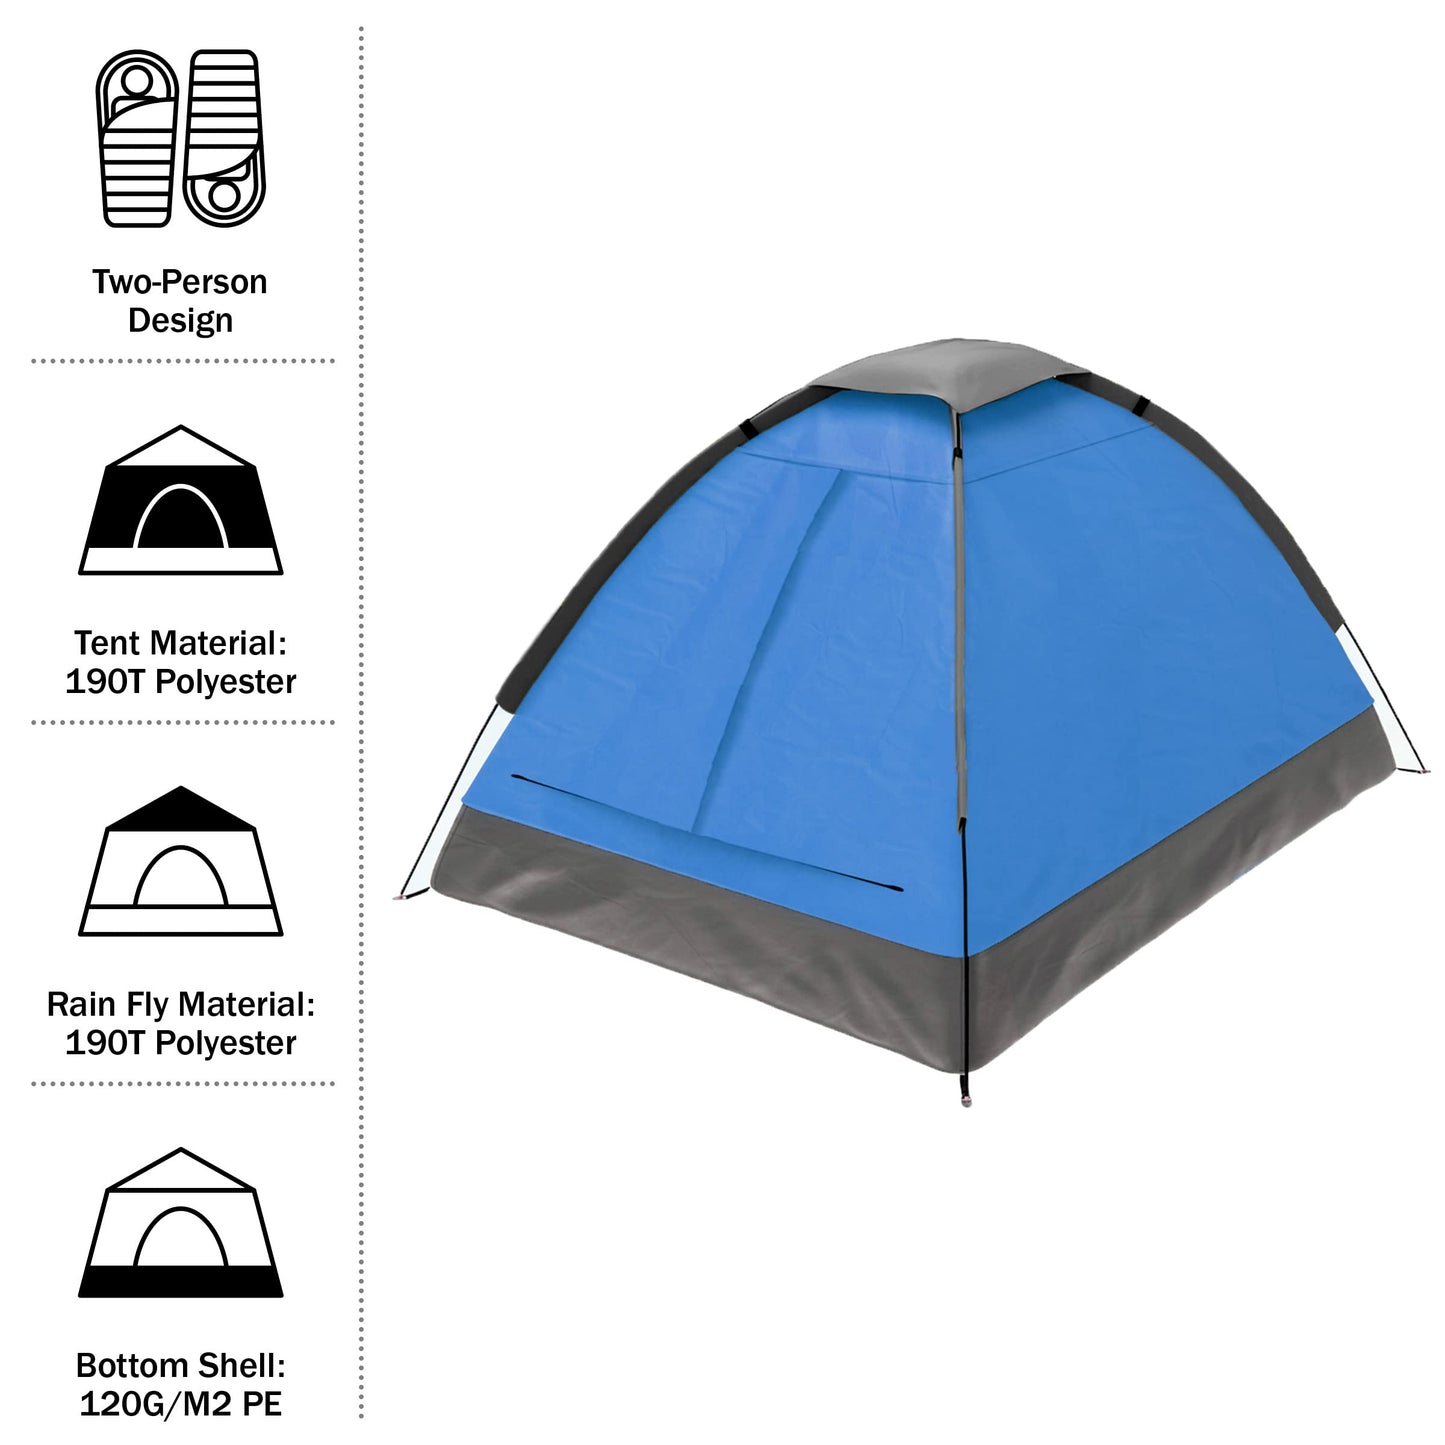 2 Person Tent – Rain Fly & Carrying Bag – Lightweight Dome Tents for Kids or Adults – Camping, Backpacking, and Hiking Gear by Wakeman Outdoors